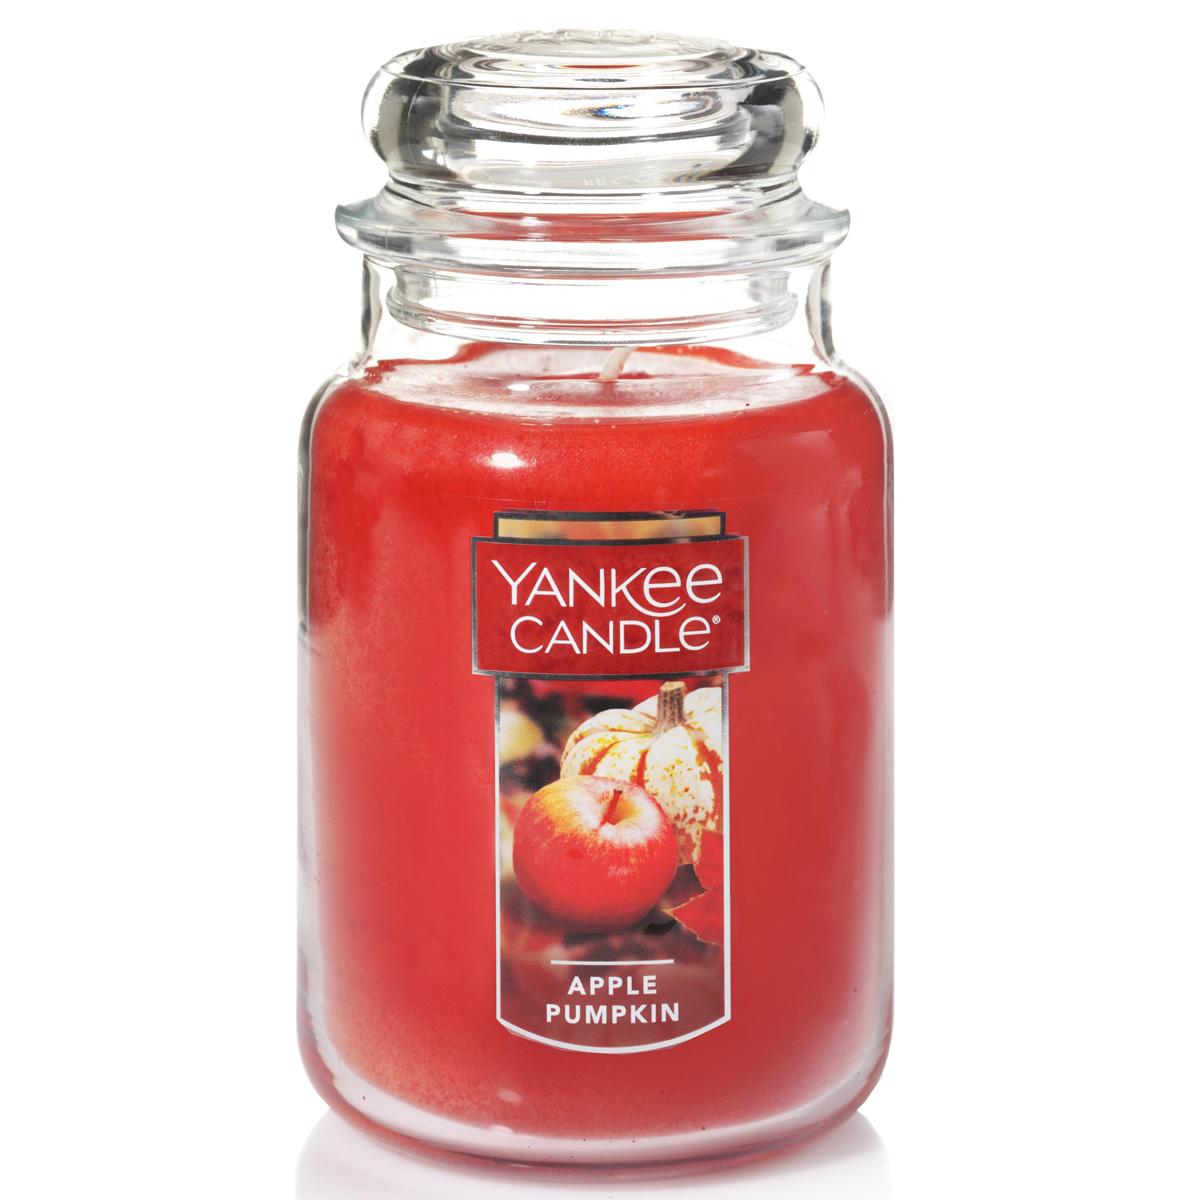 4 Yankee Candle 22oz Candles for $47.18